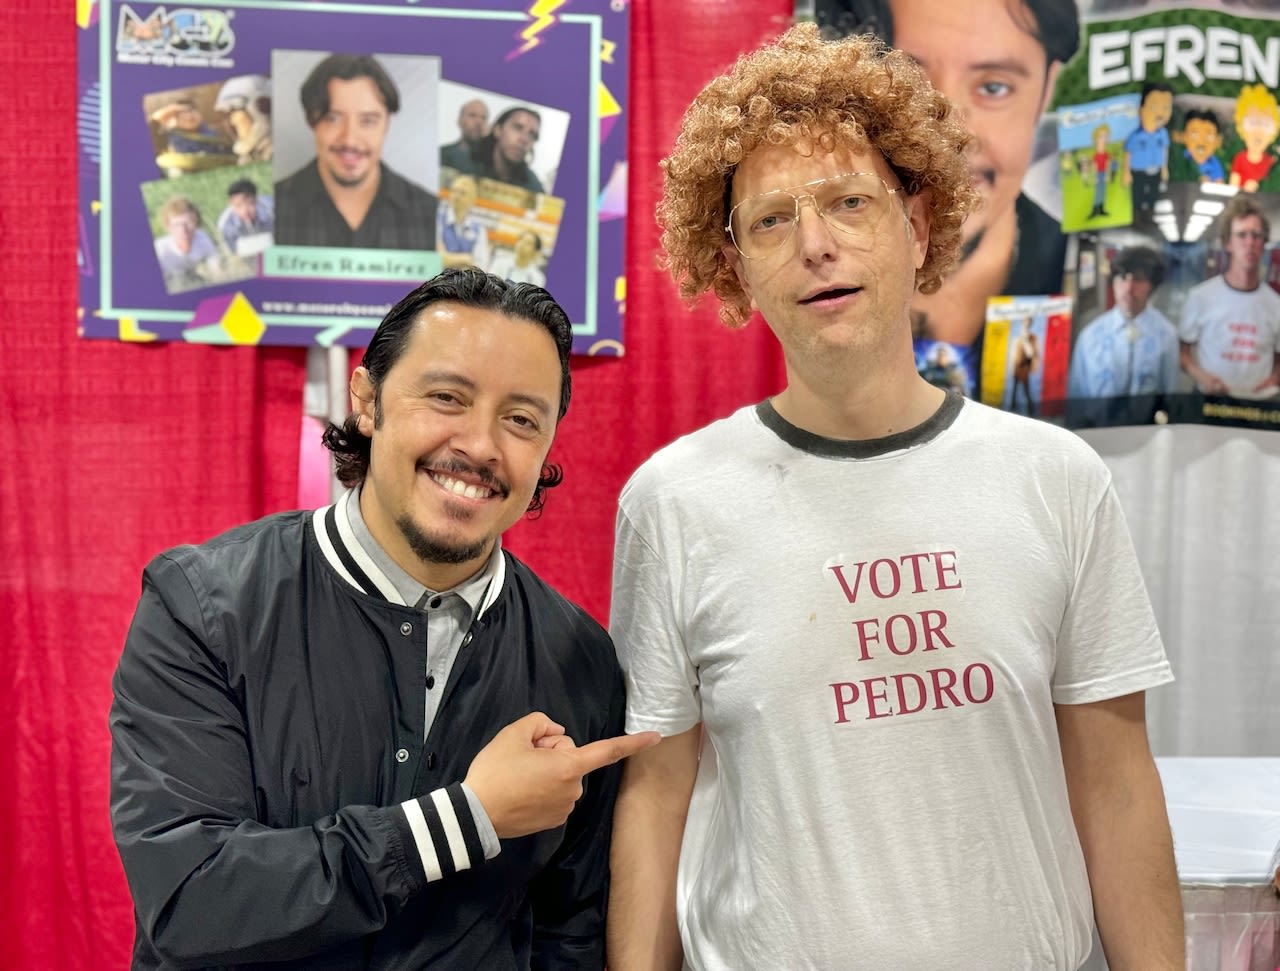 Catching up with ‘Napoleon Dynamite’s’ Pedro while he’s in Michigan